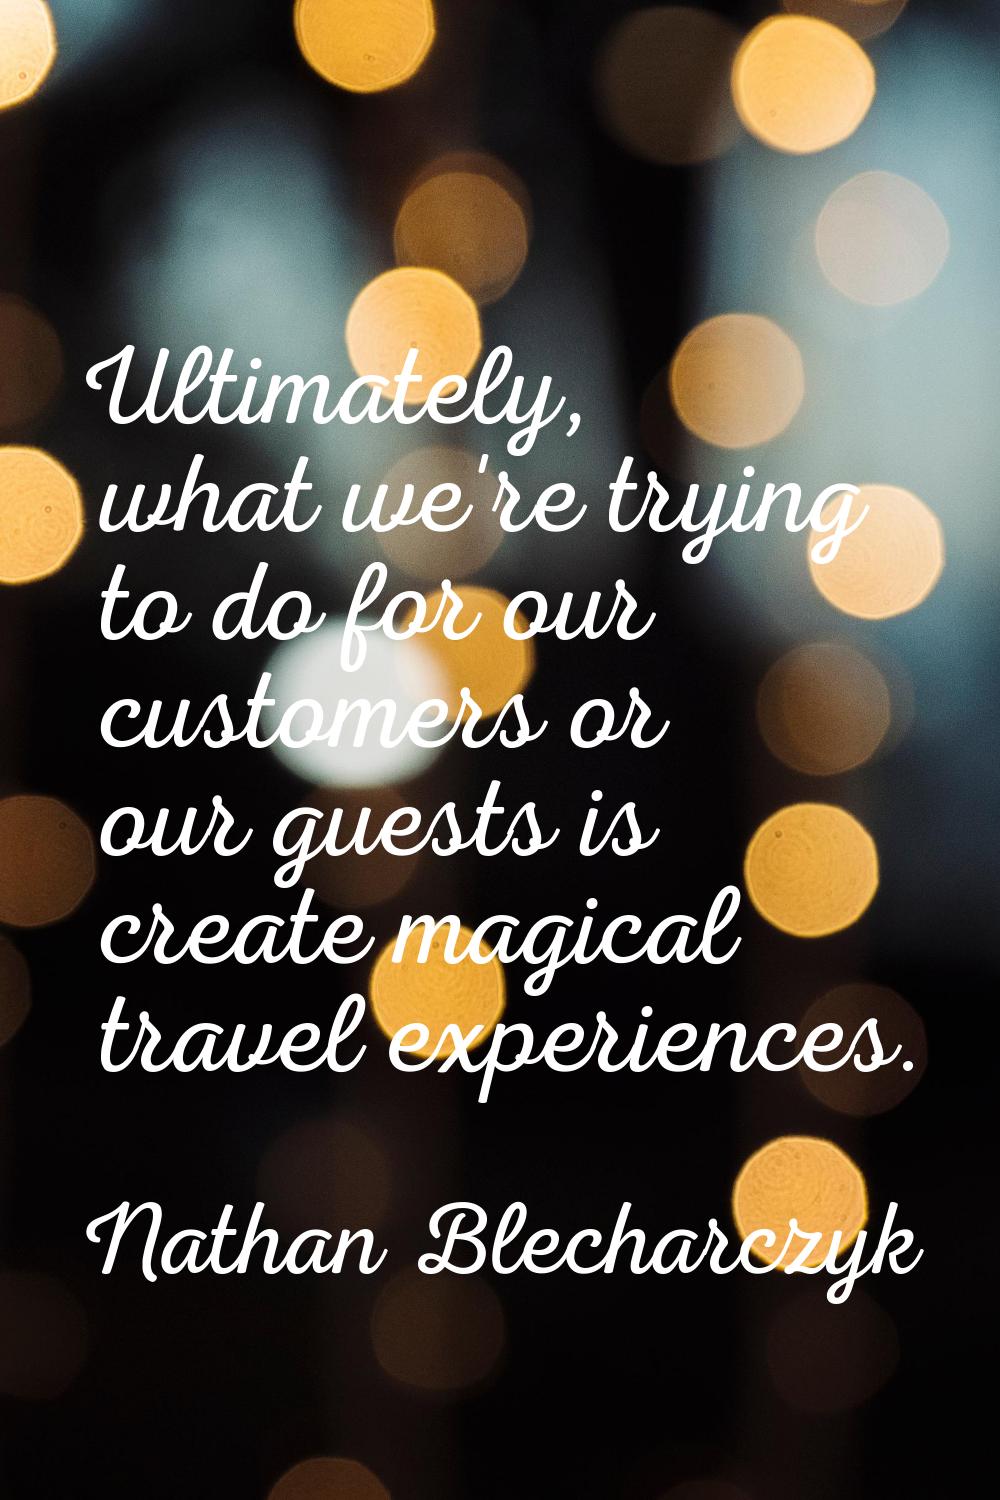 Ultimately, what we're trying to do for our customers or our guests is create magical travel experi